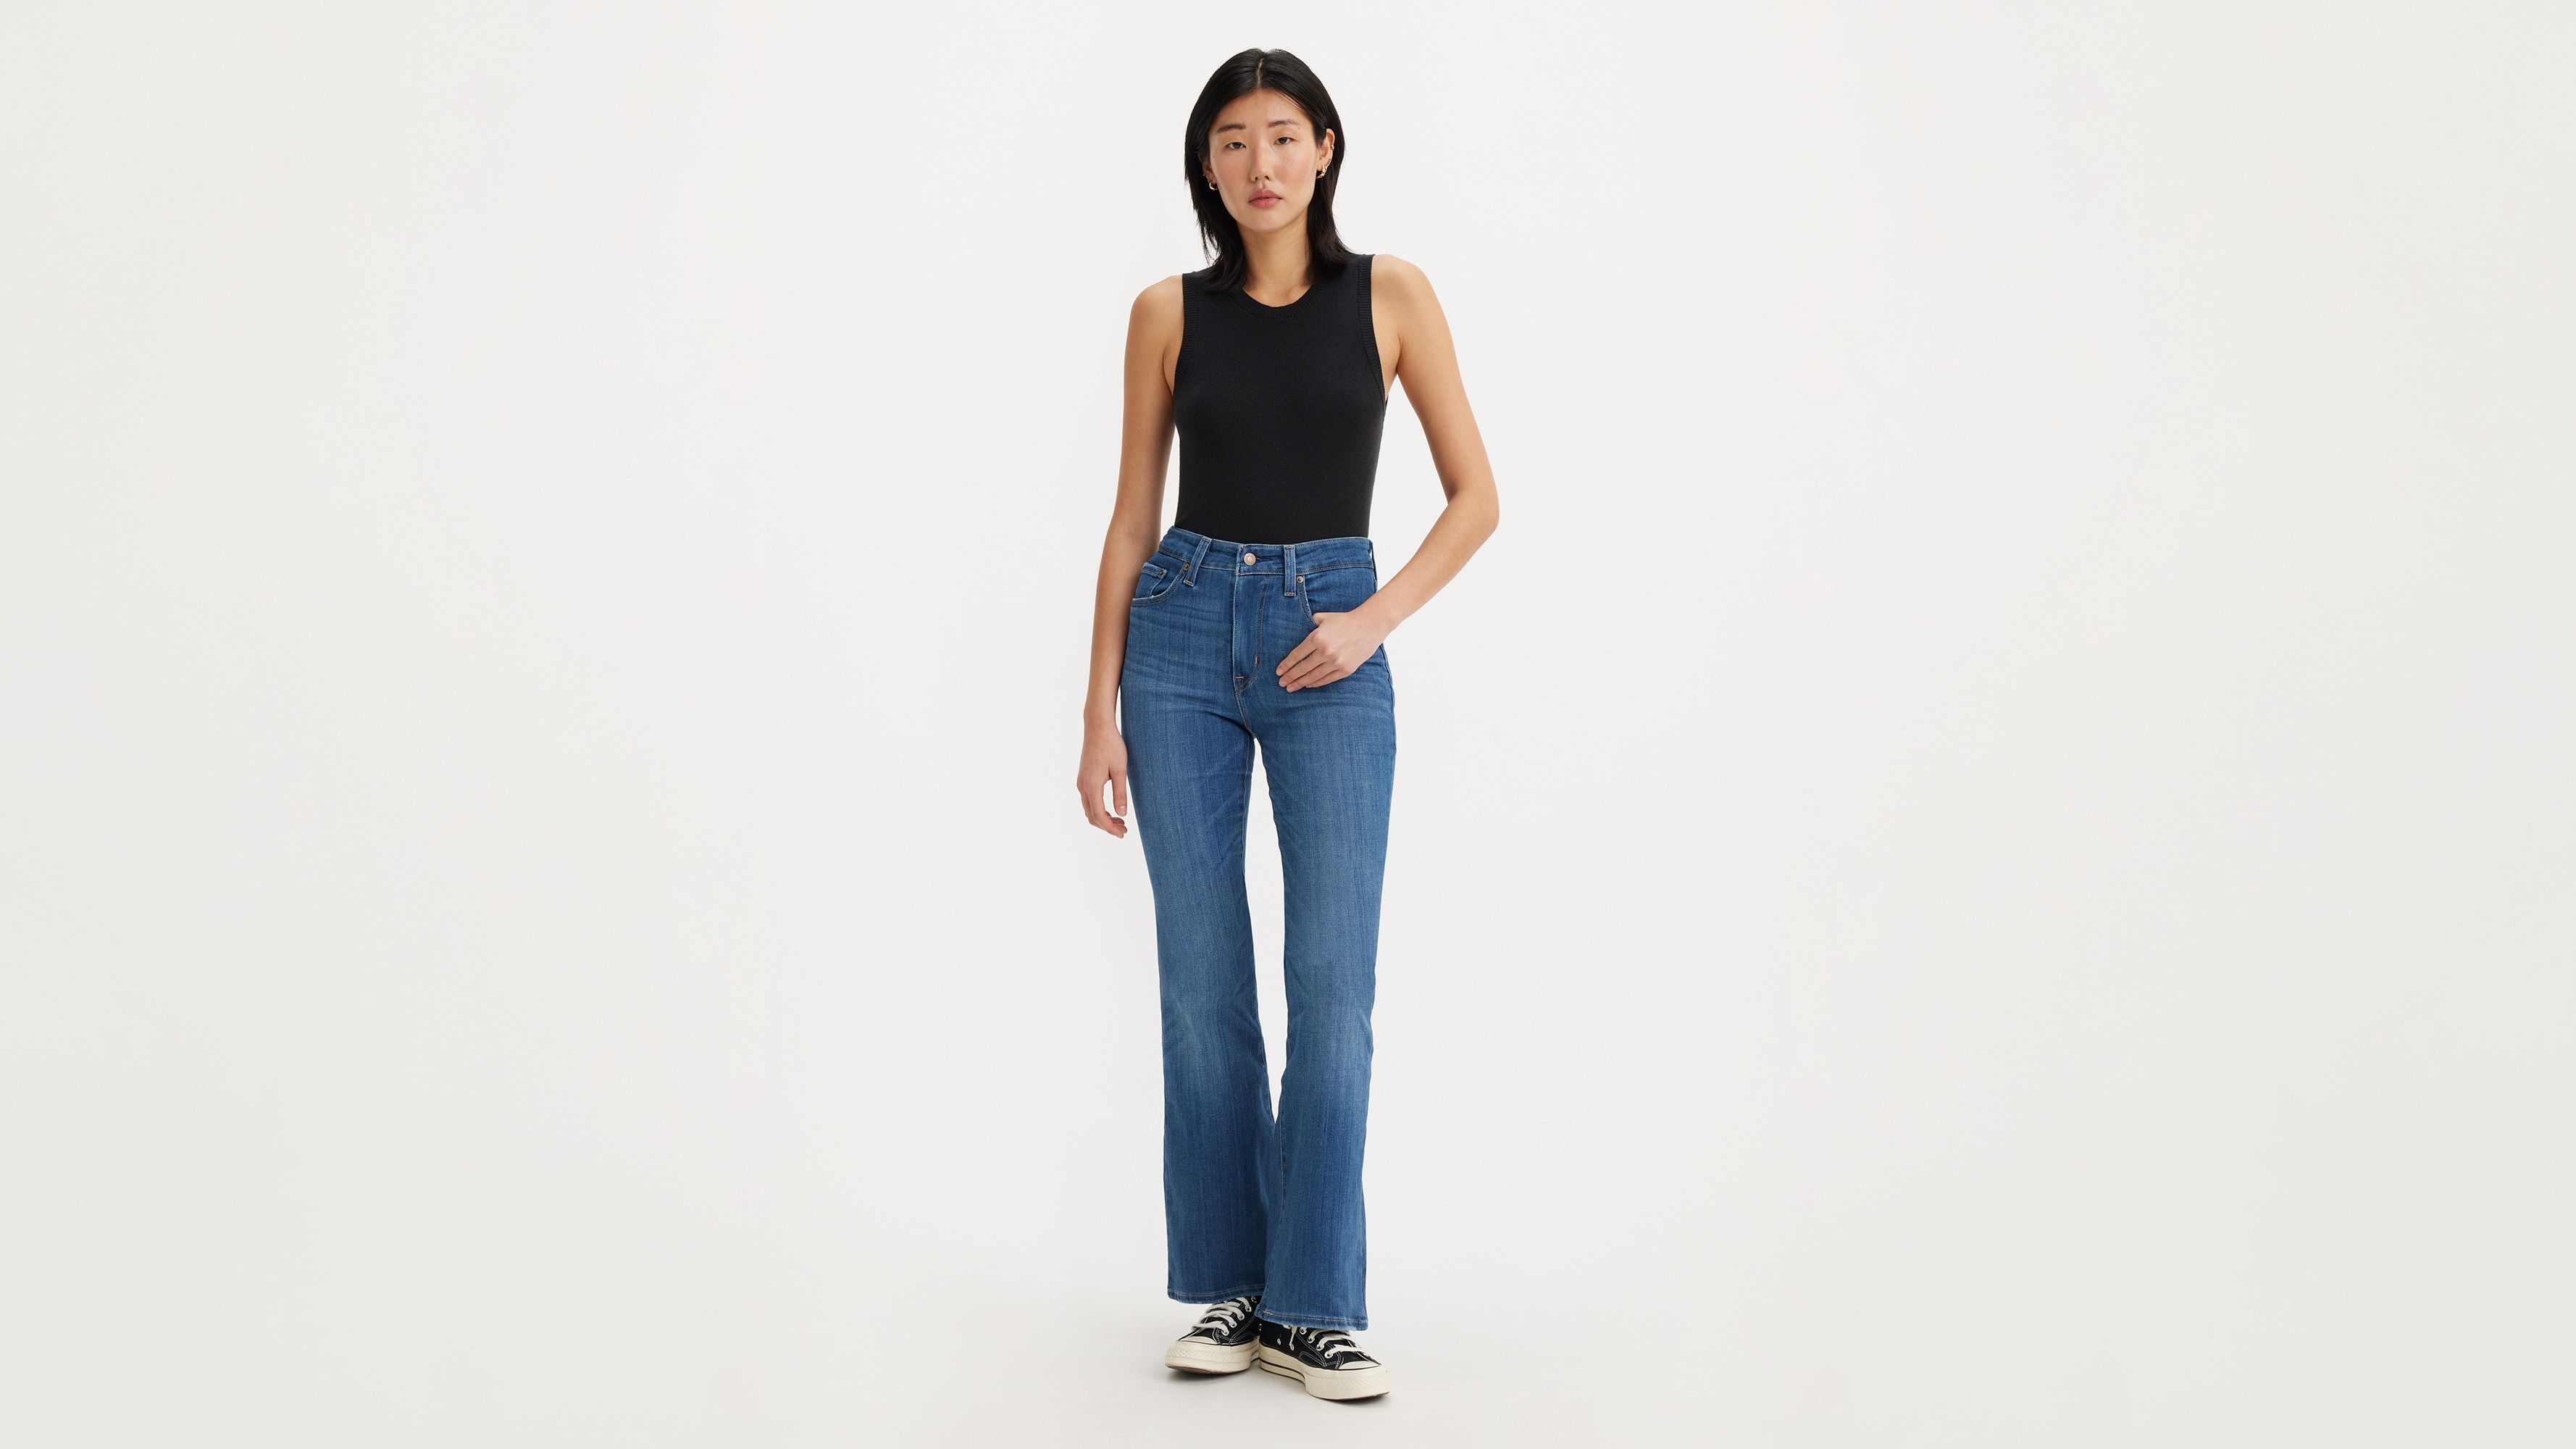  Levis Womens 726 High Rise Flare Jeans